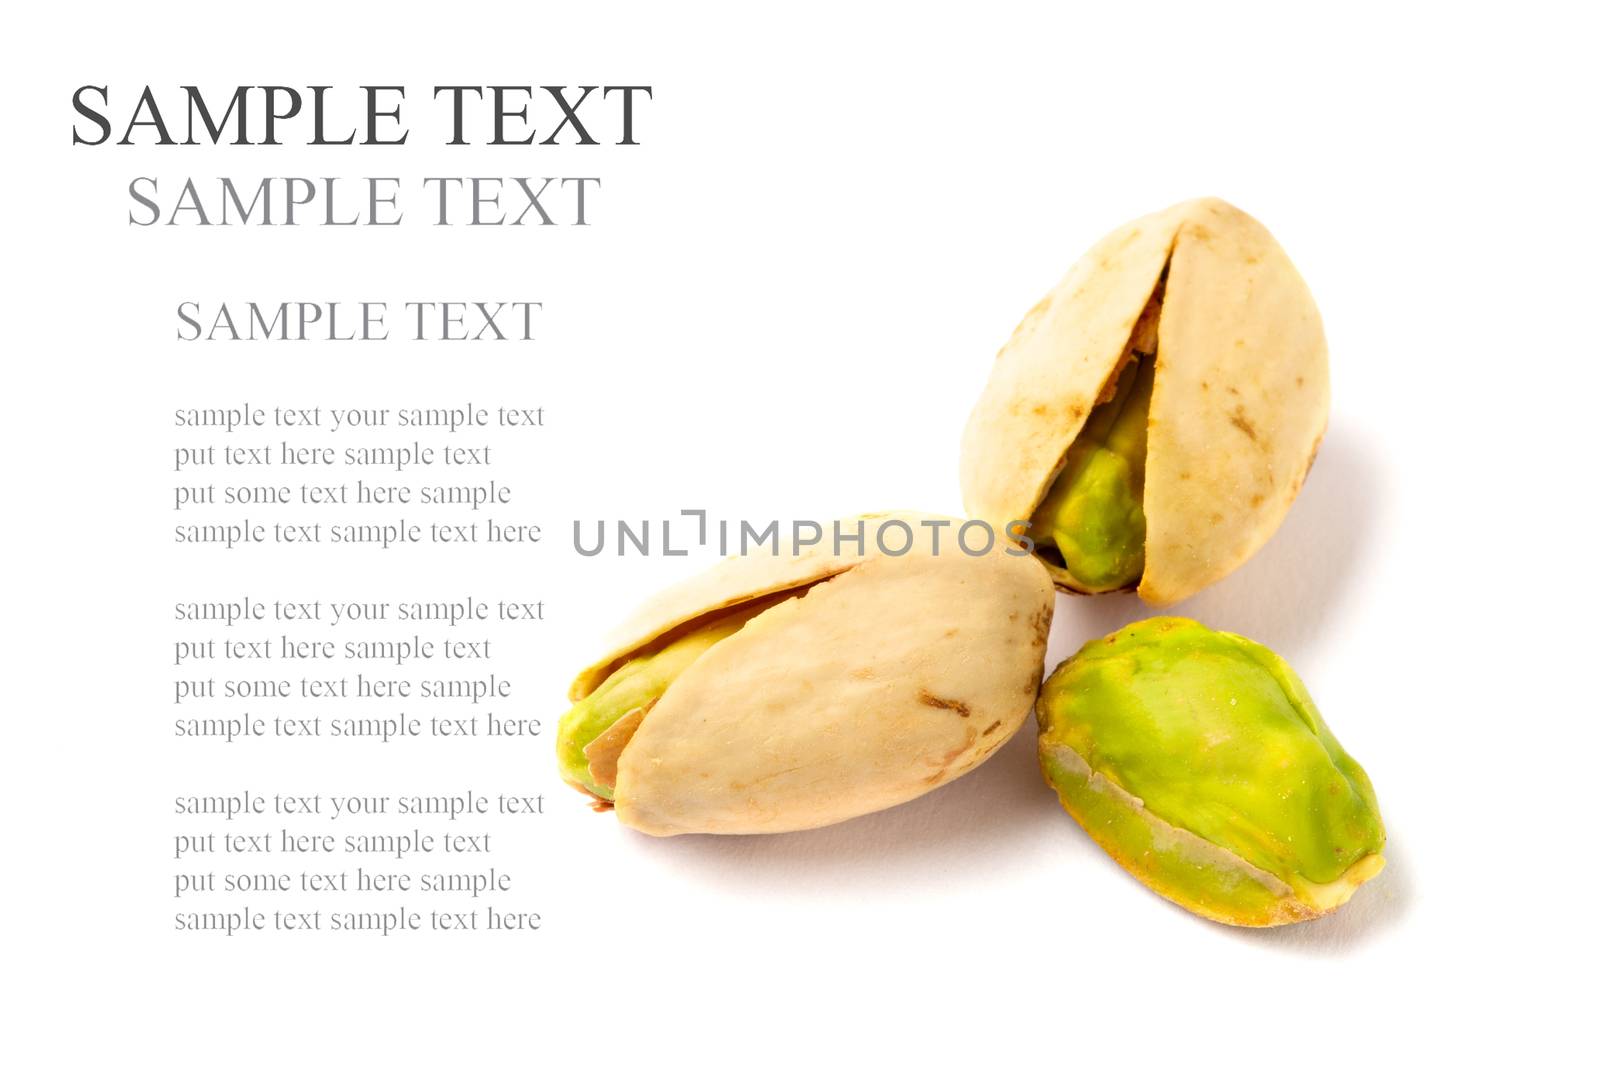 Pistachio nuts on a white background by 25ehaag6